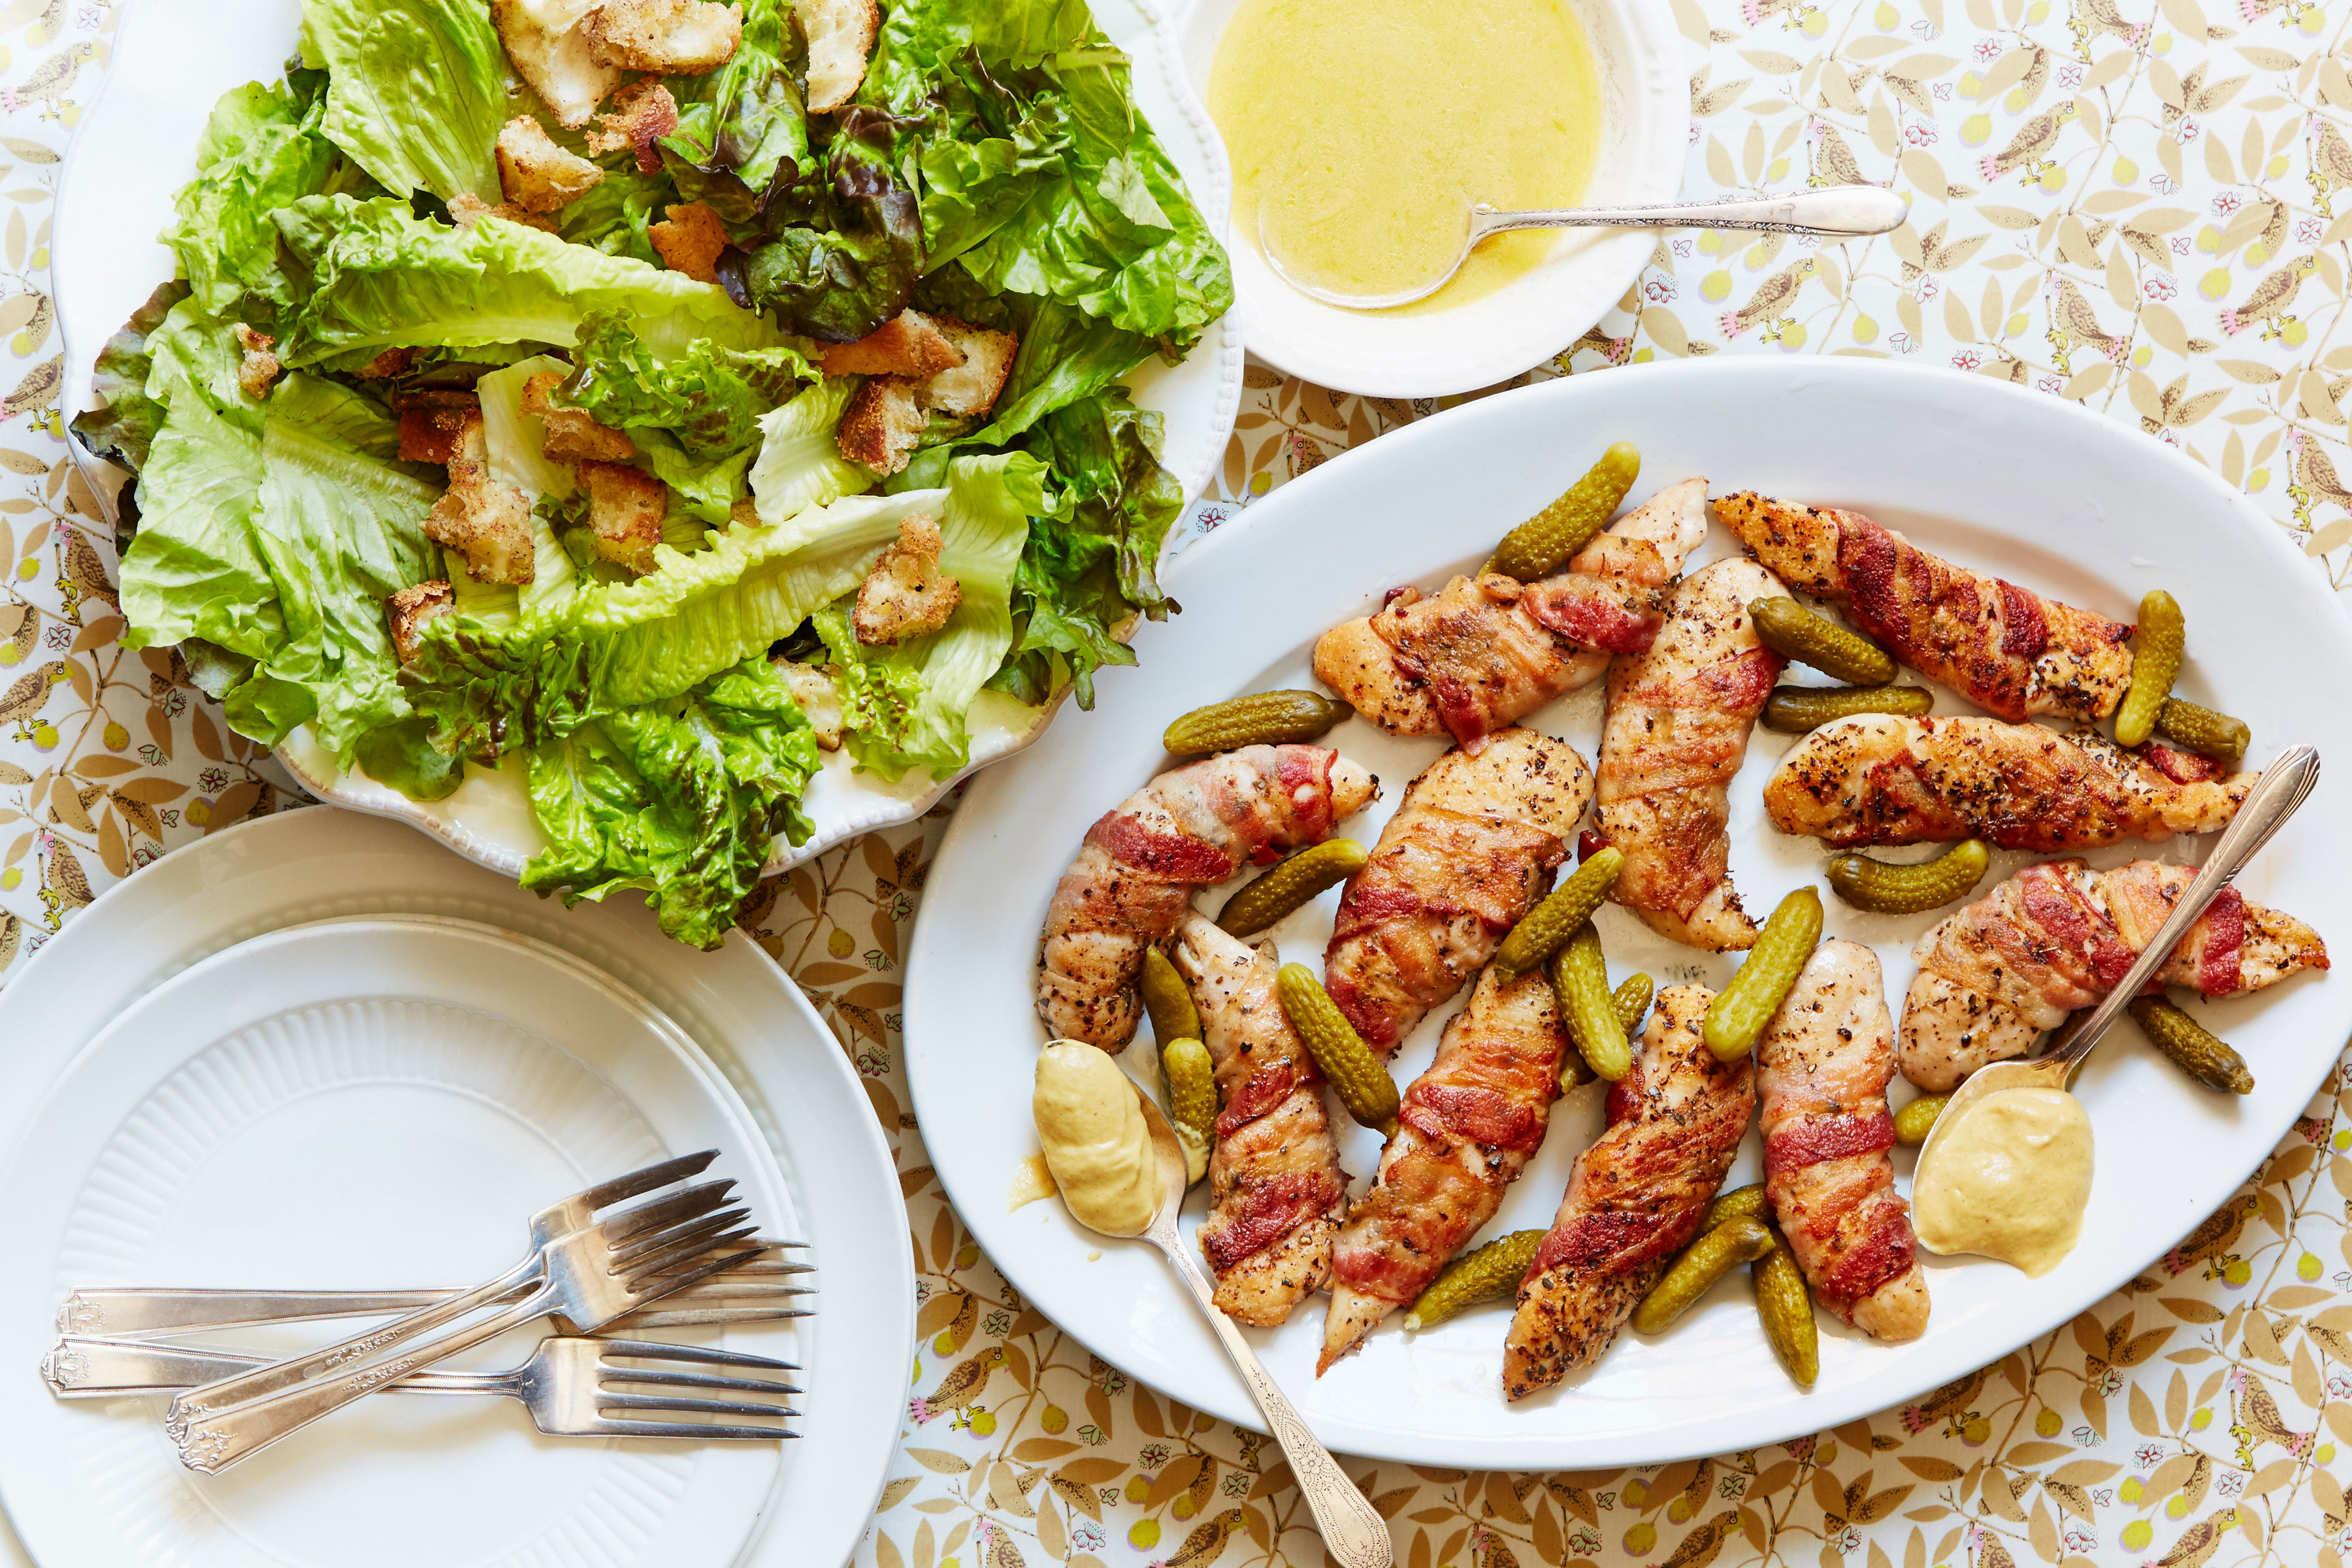 Bacon Wrapped Chicken Tenders 
with Salad and Croutons